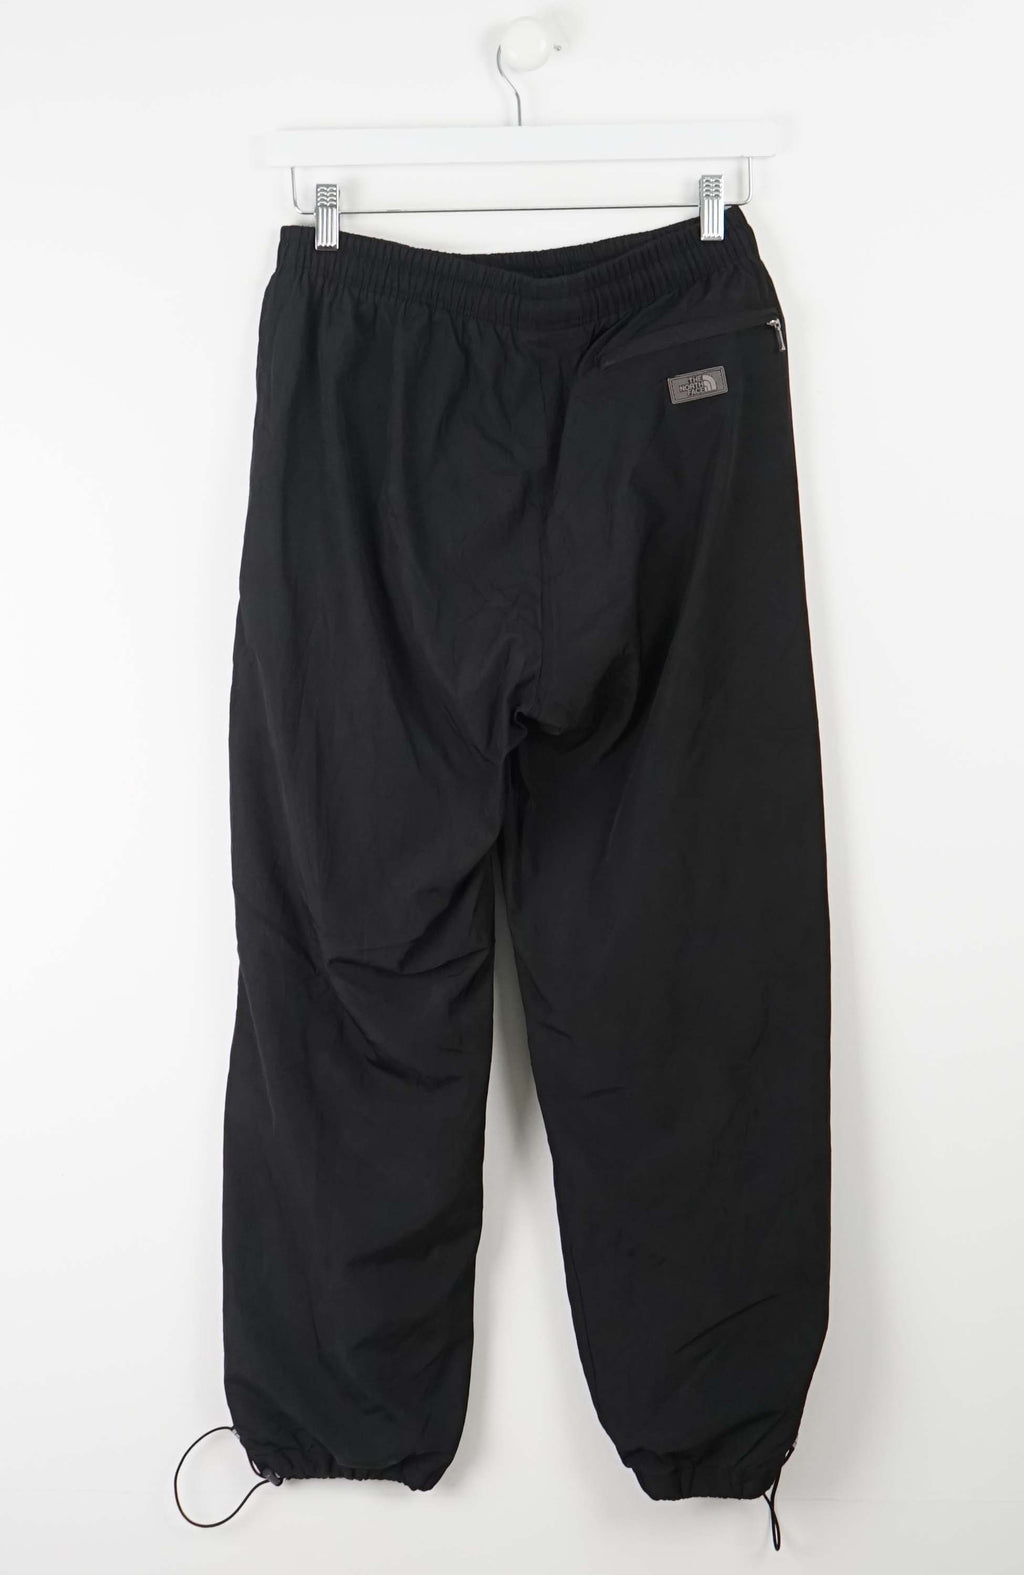 VINTAGE THE NORTH FACE TRACK PANTS W30